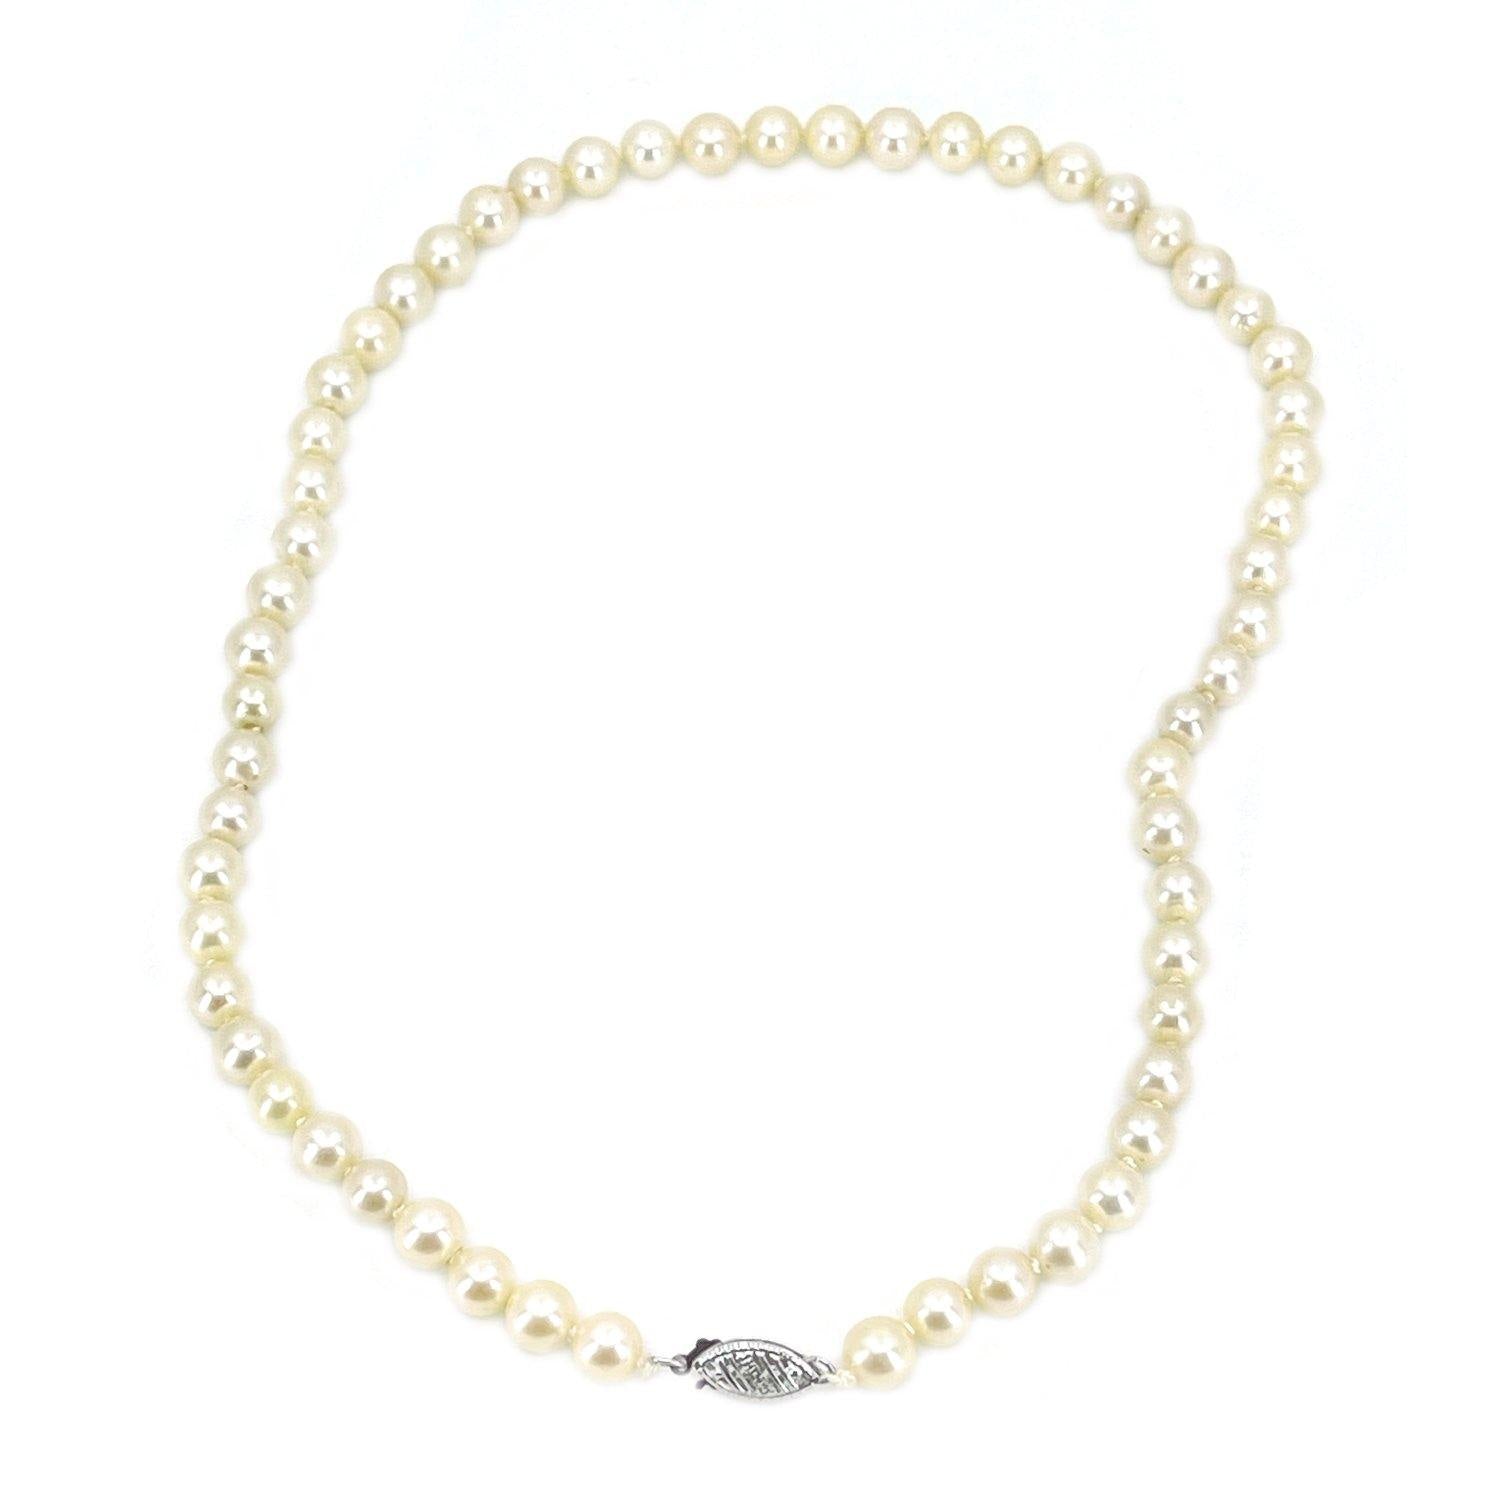 Choker Japanese Saltwater Cultured Akoya Pearl Necklace - 14K White Gold 15.50 Inch